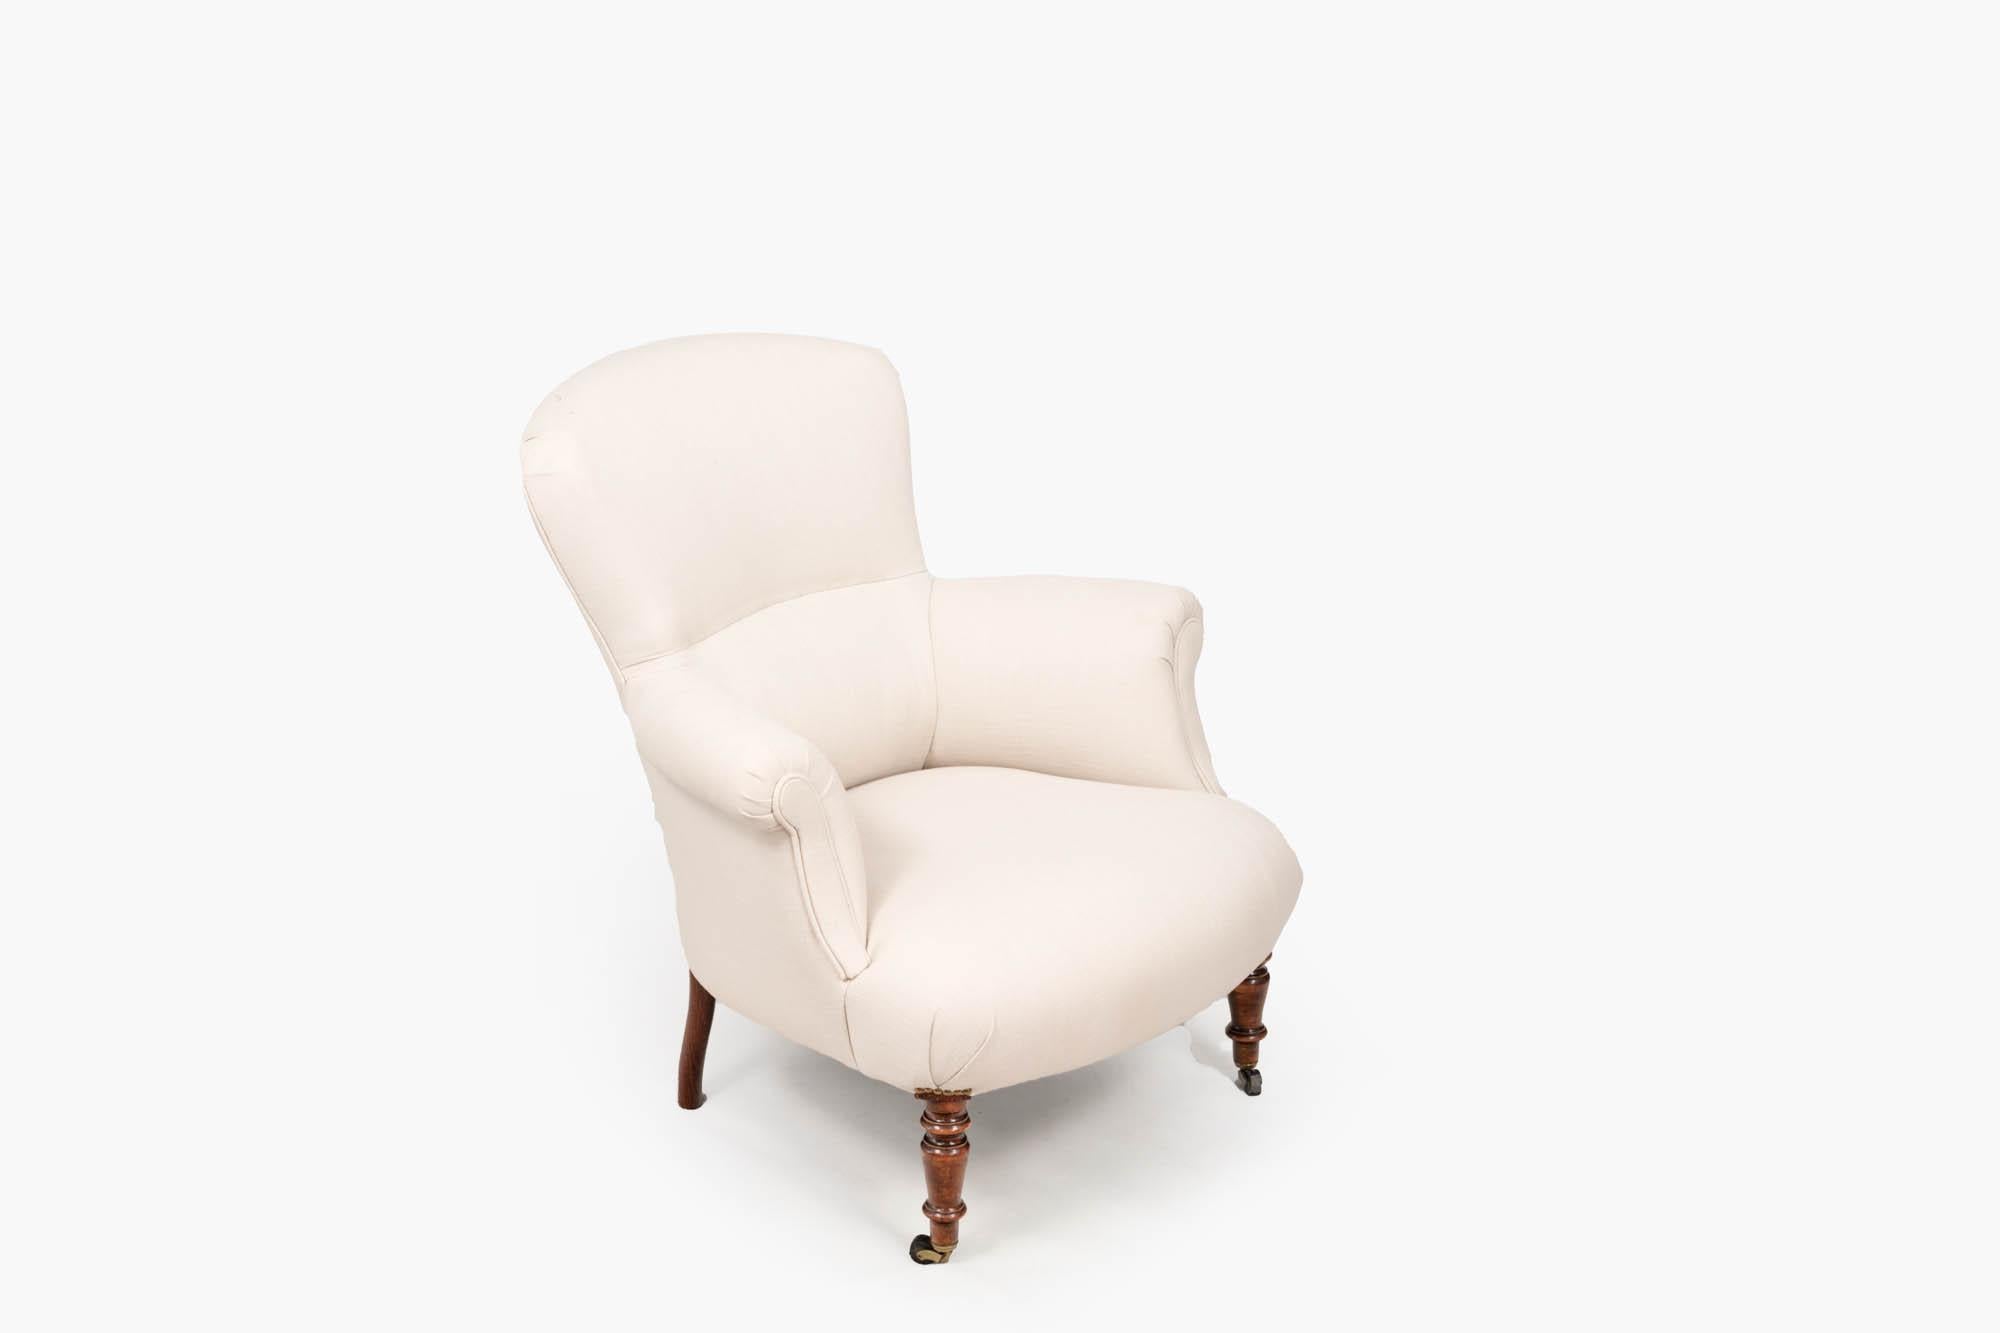 19th Century occasional chair in the French style, with simply turned mahogany legs to the front terminating on brass castors, and two plain mahogany legs to the rear. This piece has recently been re-upholstered in a simple fabric with decorative